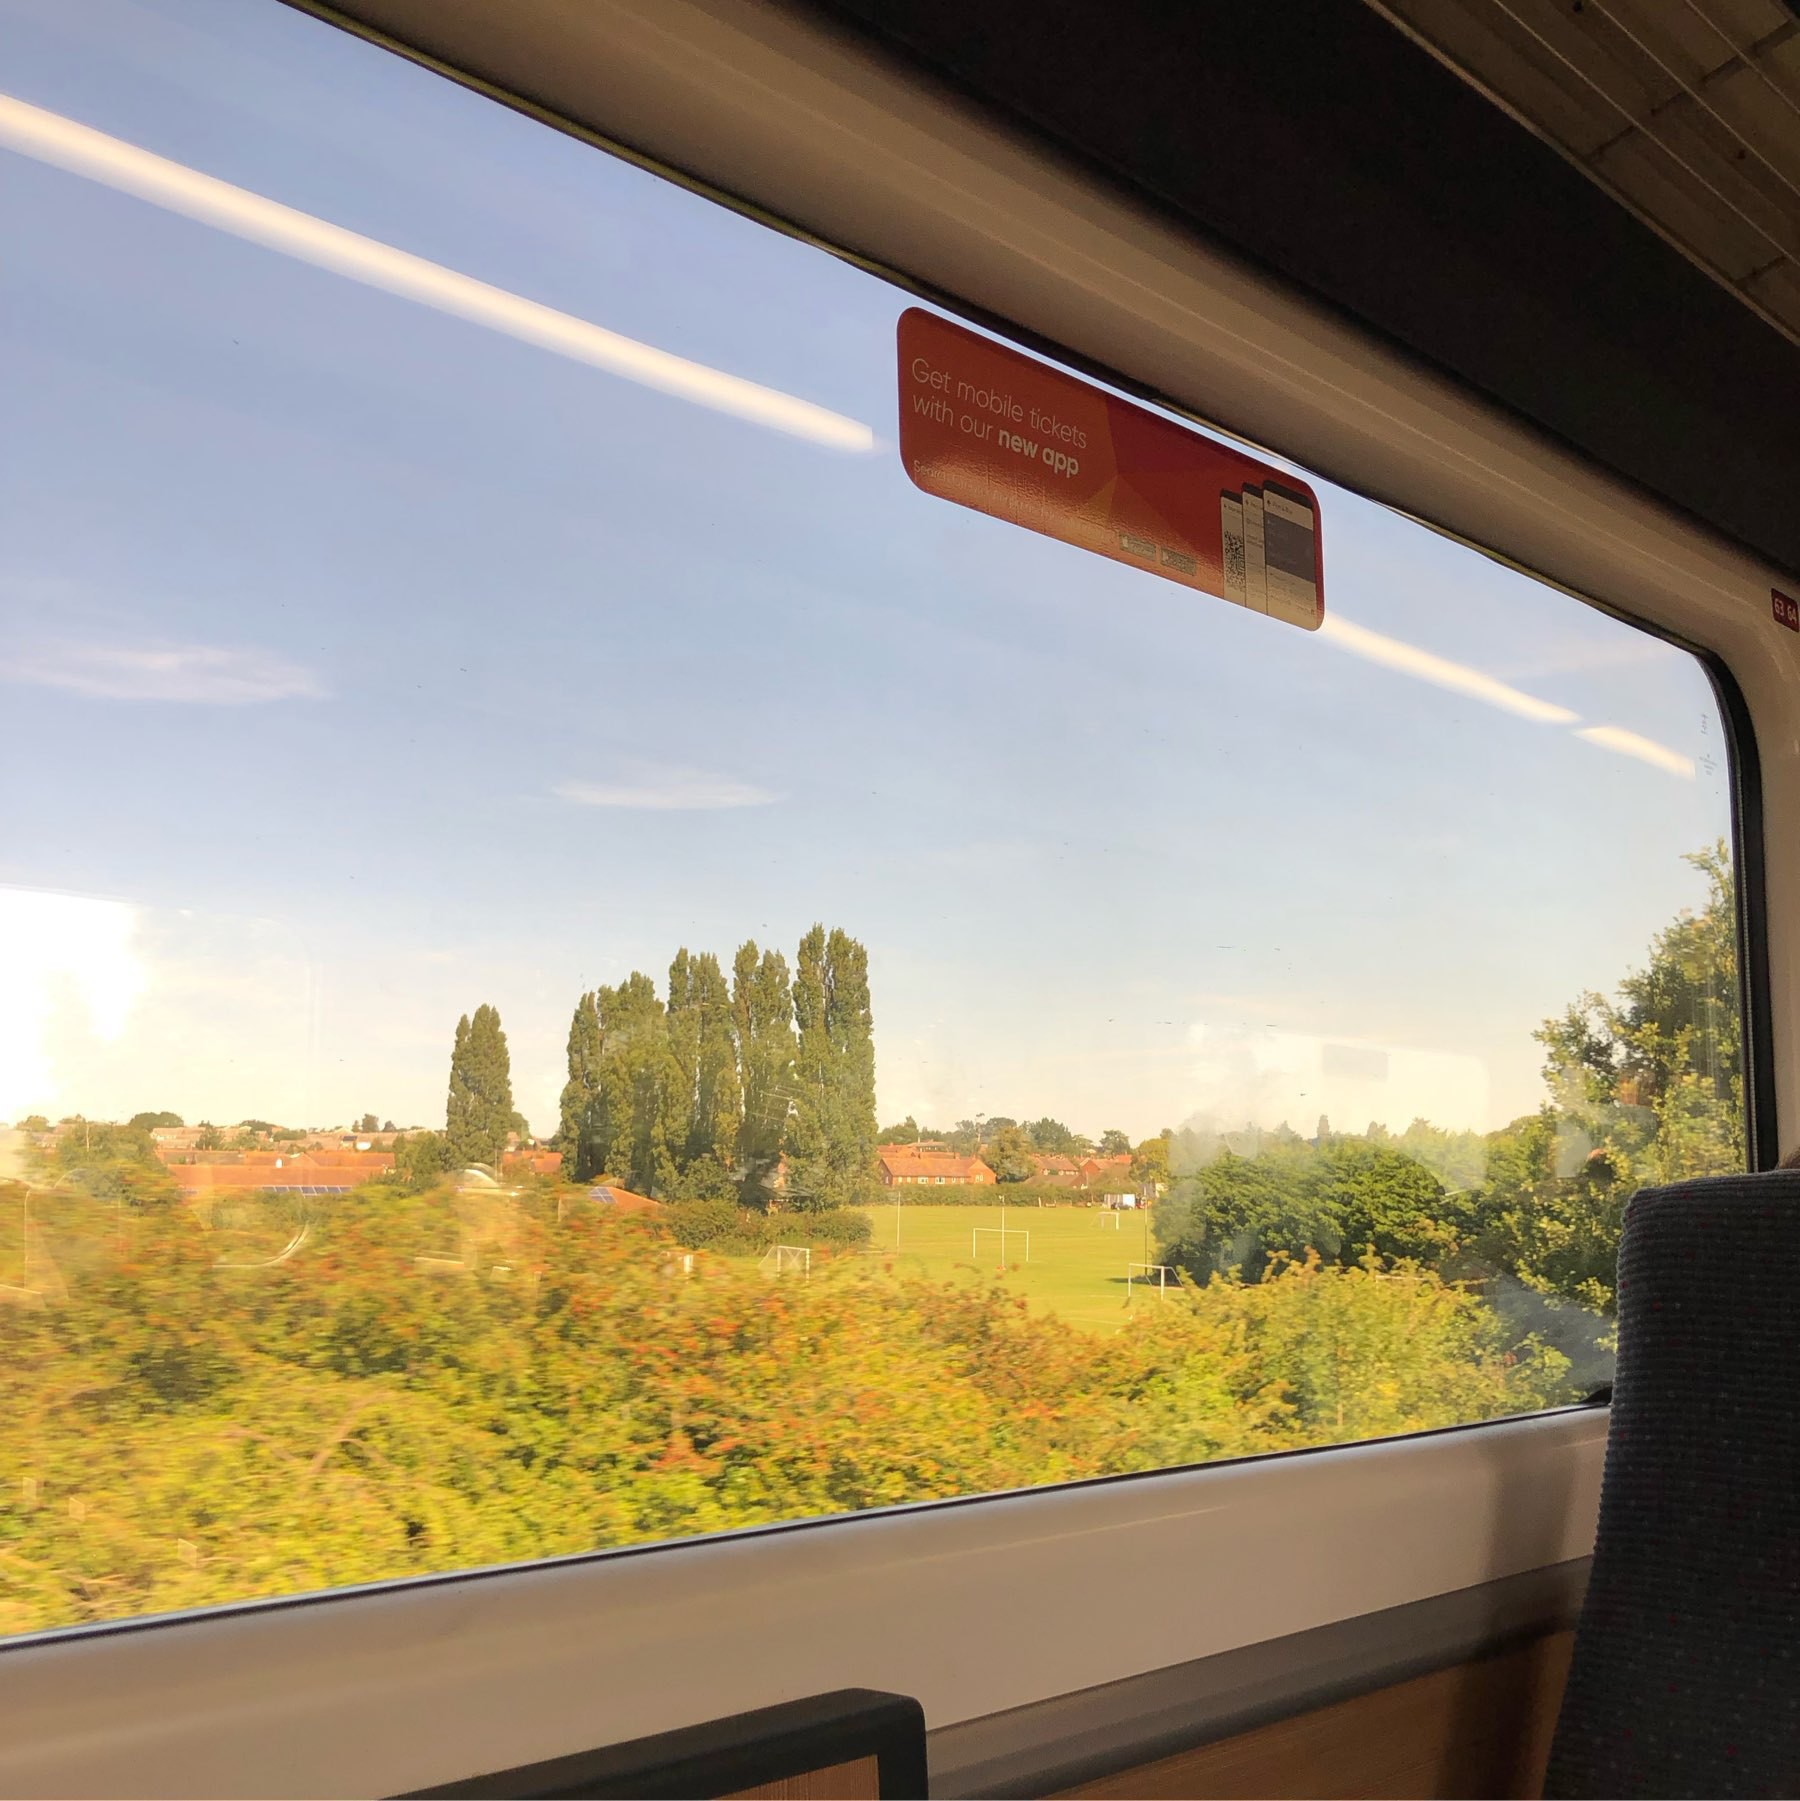 Train past Essex with a lovely greenery view from the window.